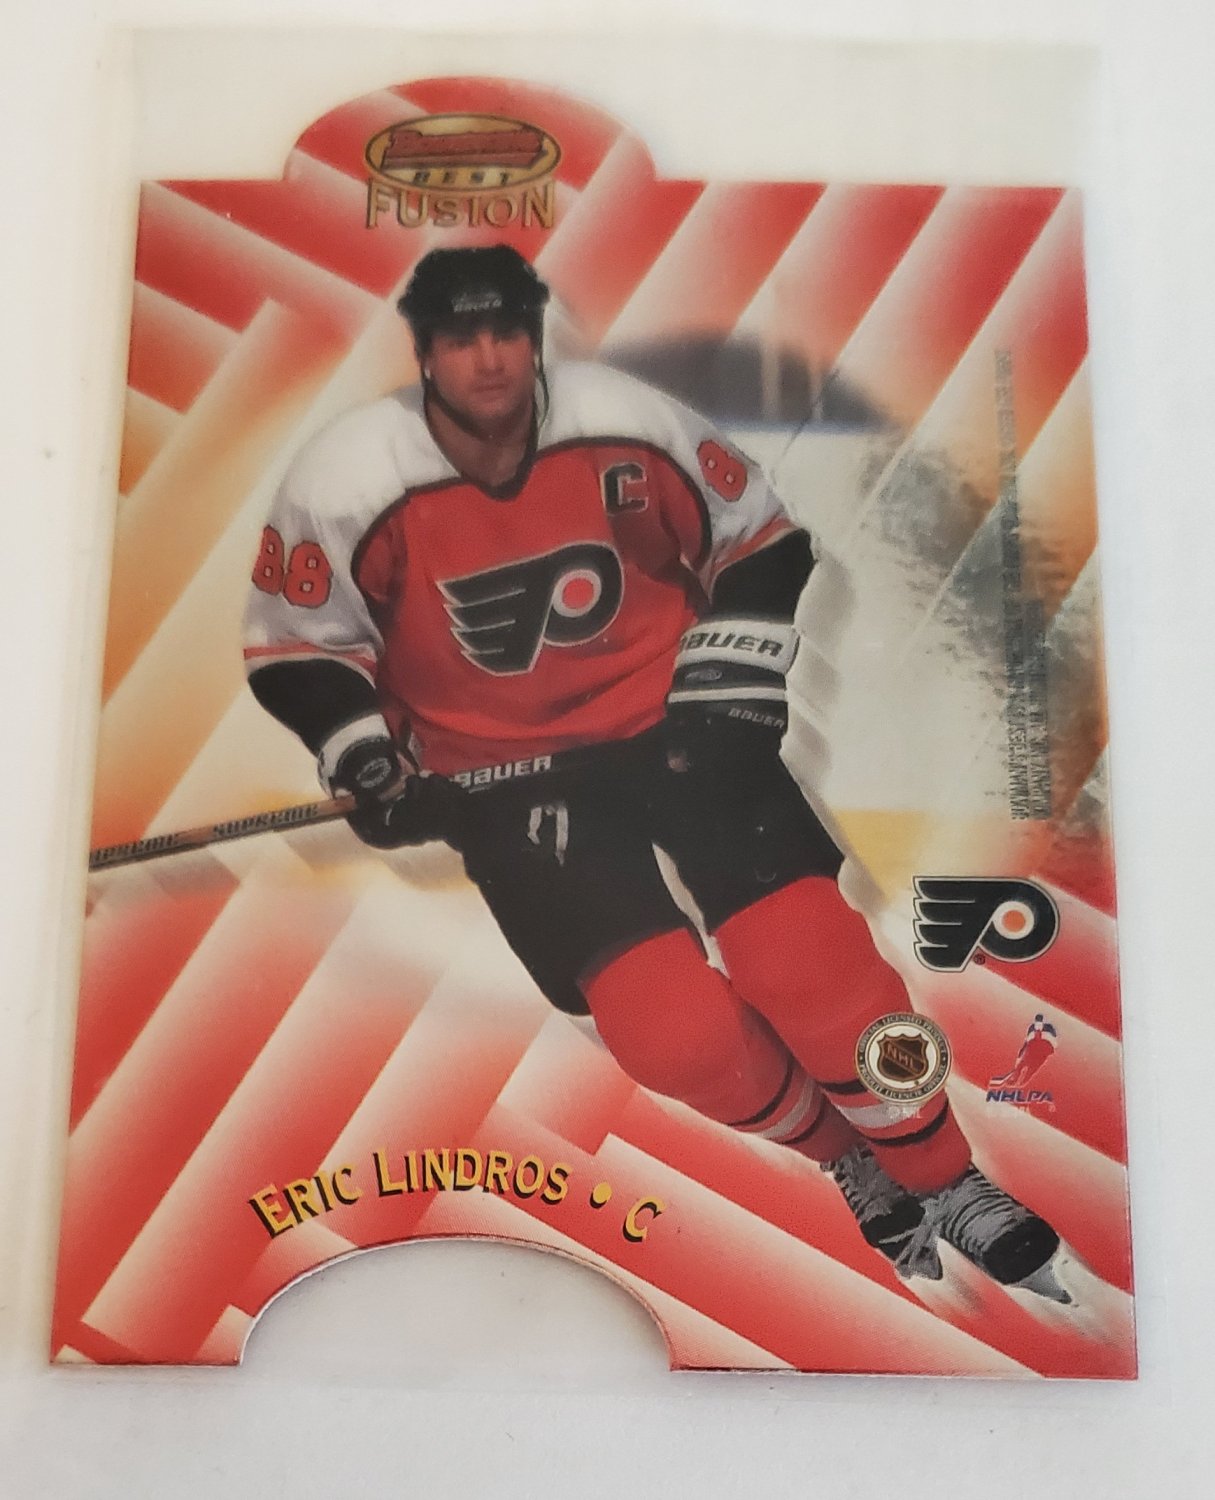 Eric Lindros & Vincent Lecavalier 1998-99 Bowman Best Mirror Image Fusion Insert Card